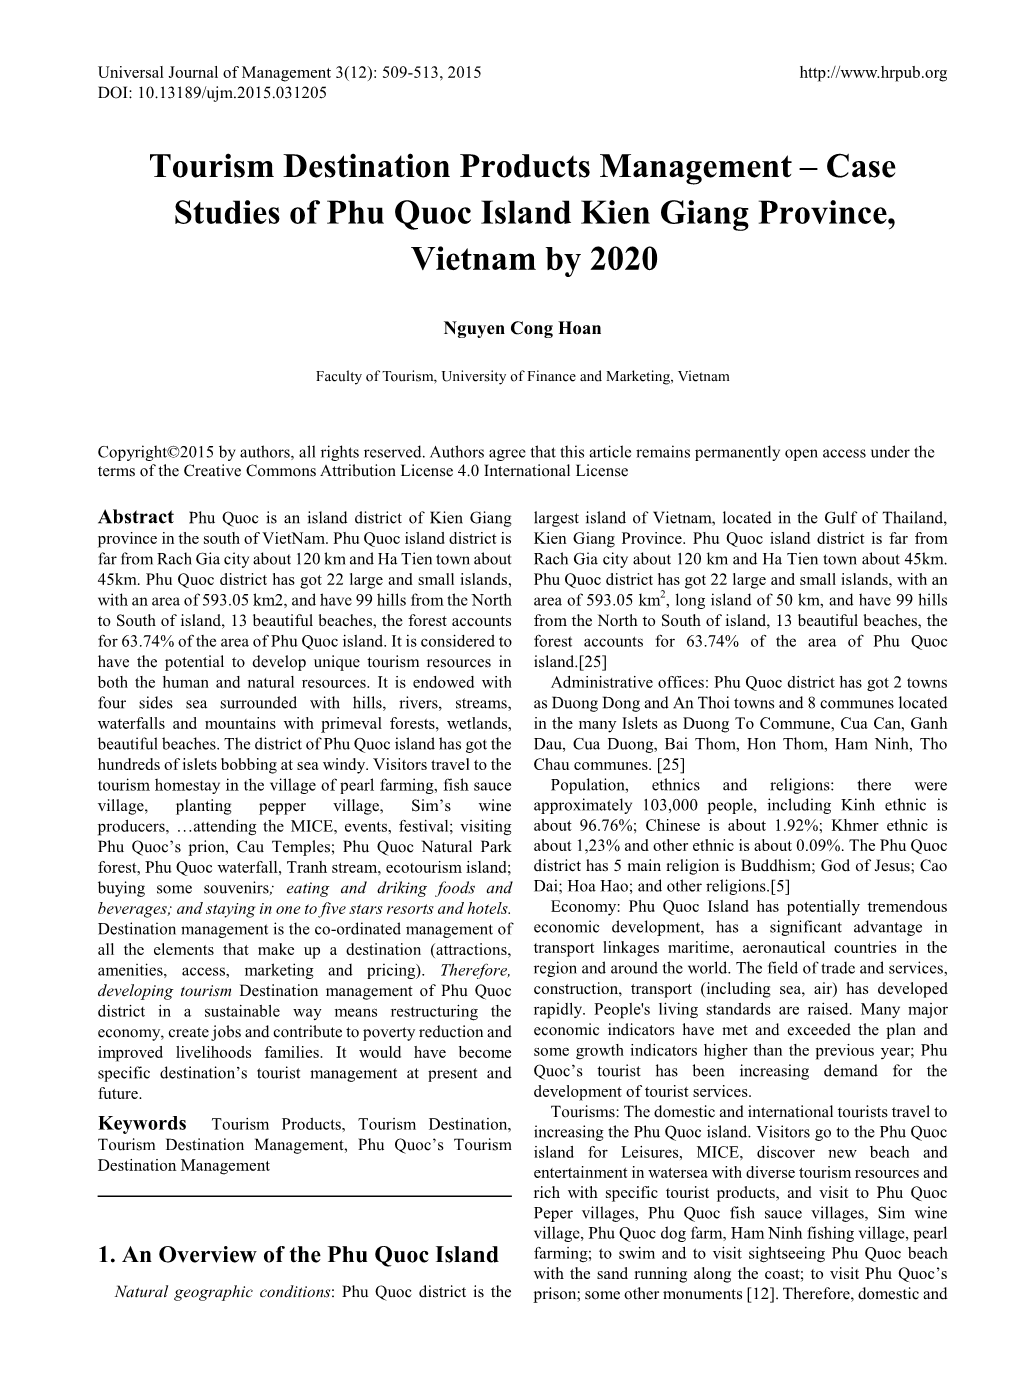 Case Studies of Phu Quoc Island Kien Giang Province, Vietnam by 2020